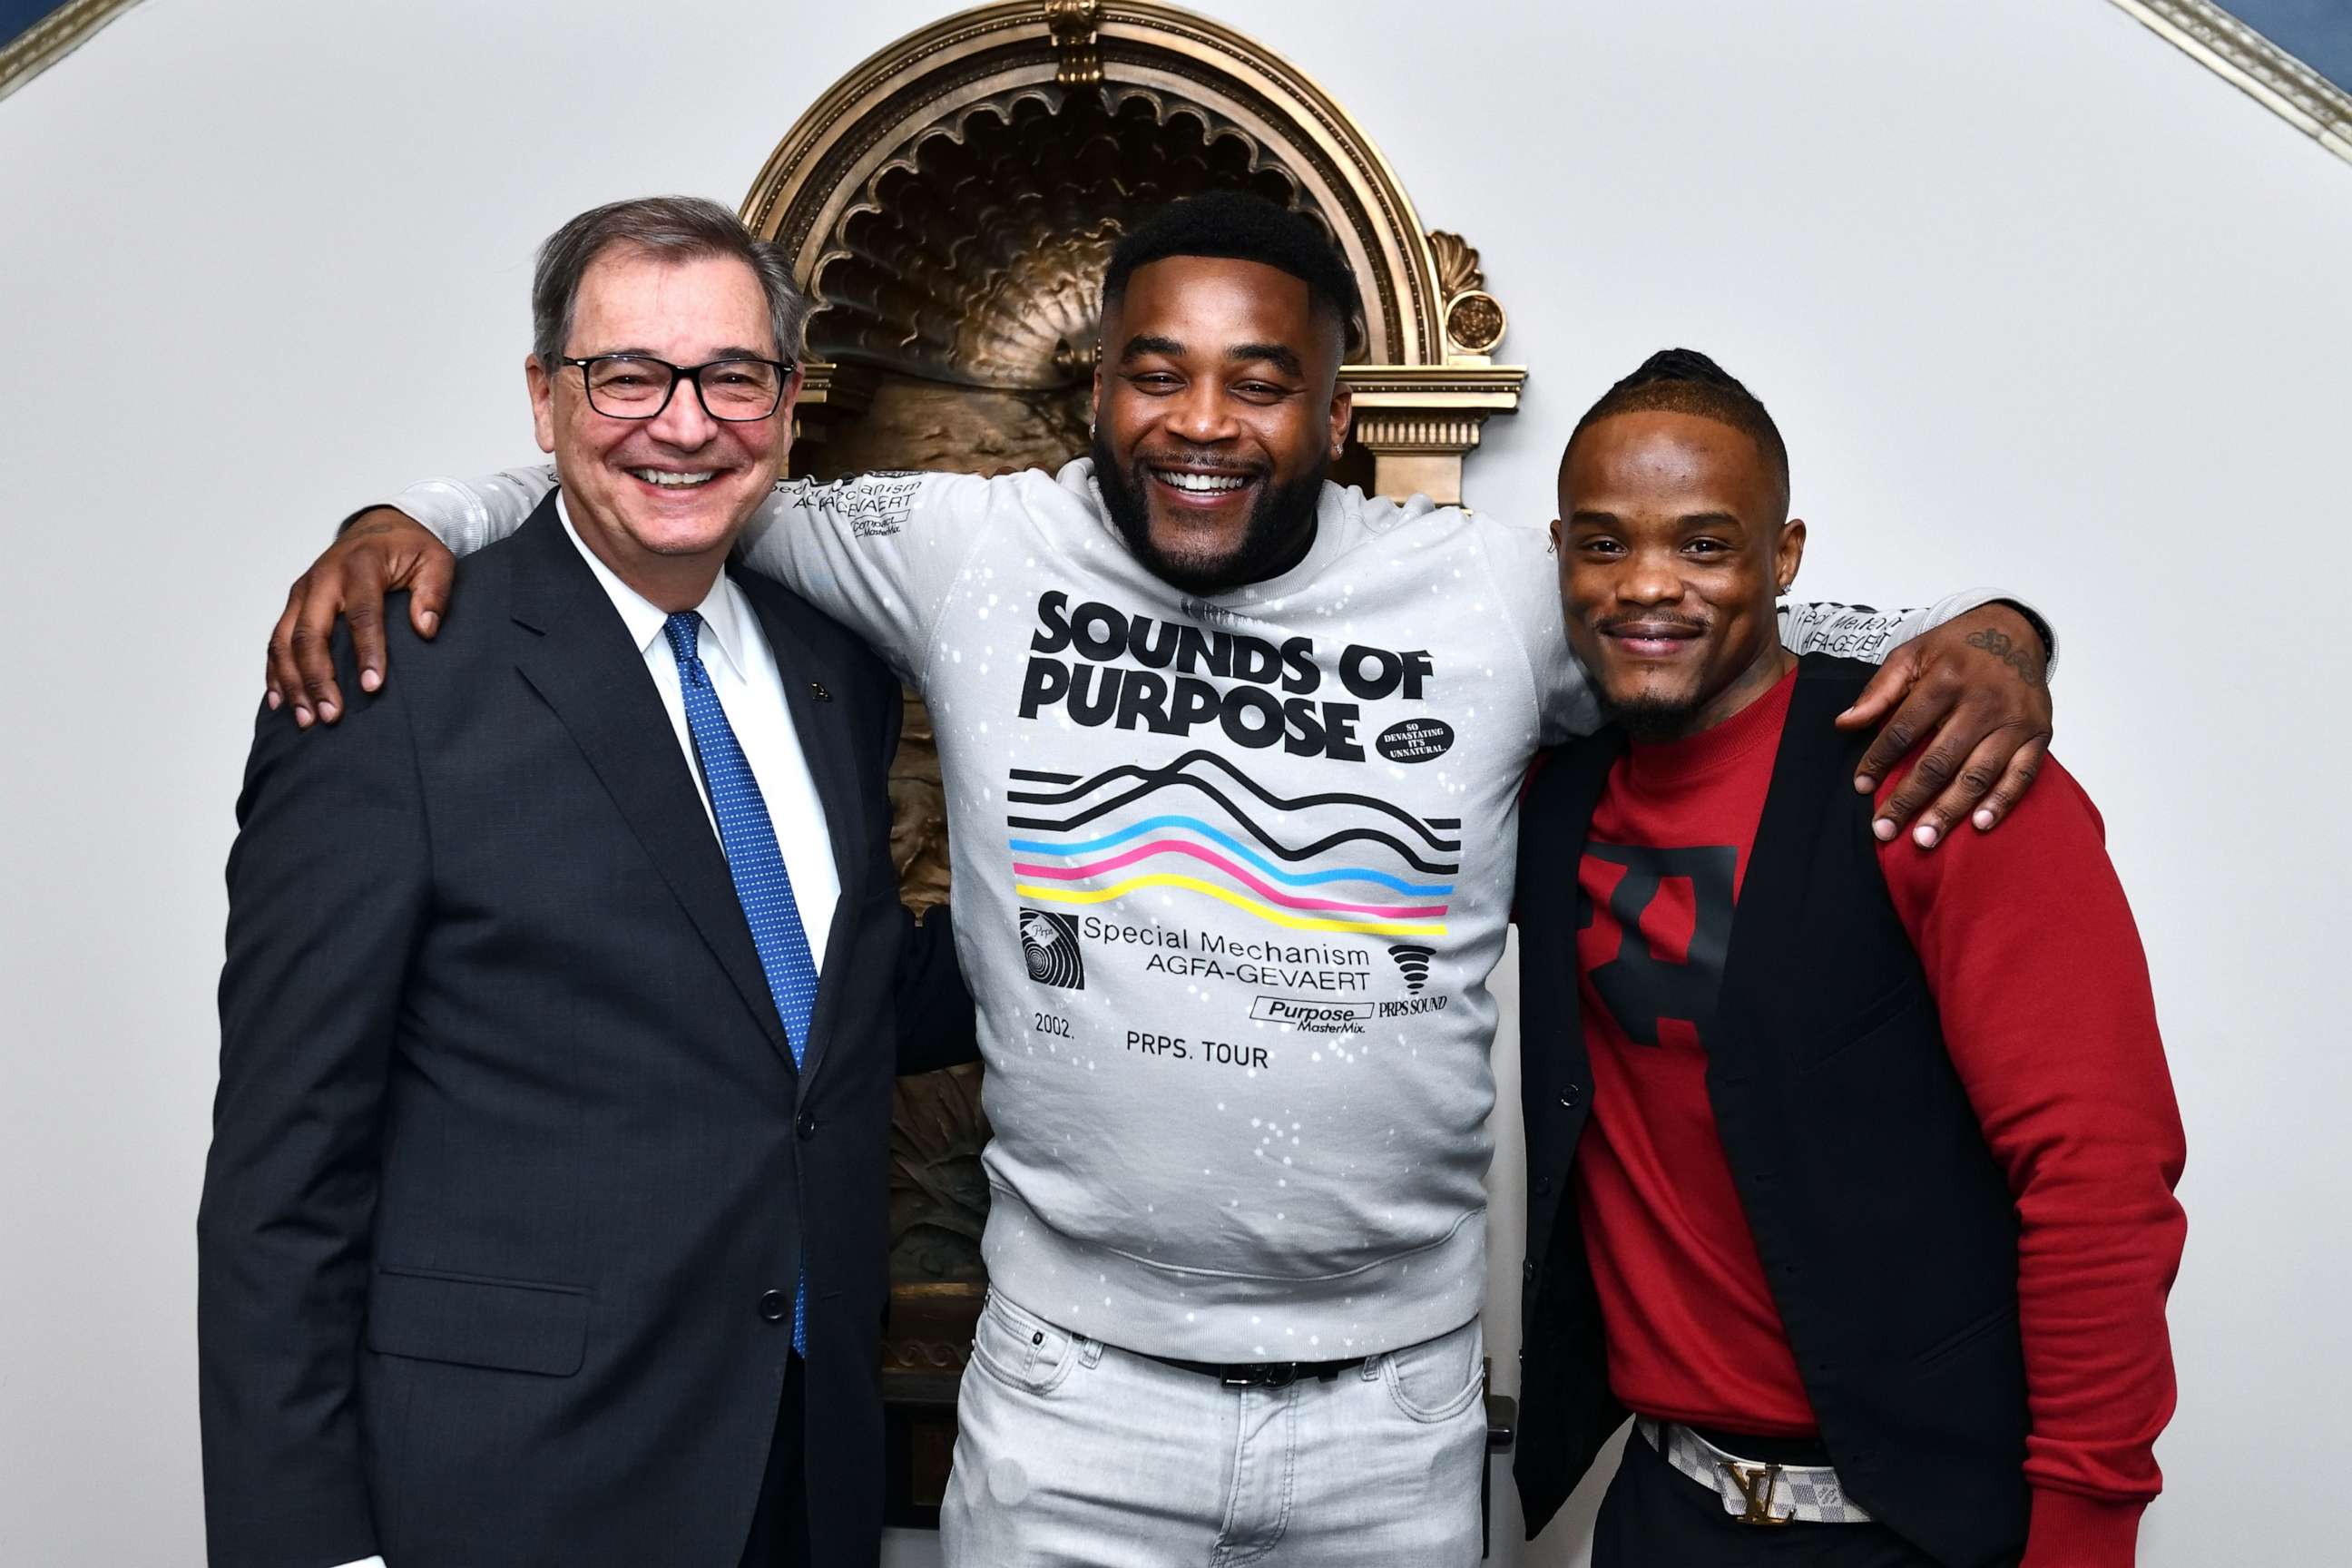 PHOTO: University of Akron President Gary L. Miller (left) awarded Michael Sutton (middle) and Kenny Phillips full scholarships after they were released from a wrongful conviction.